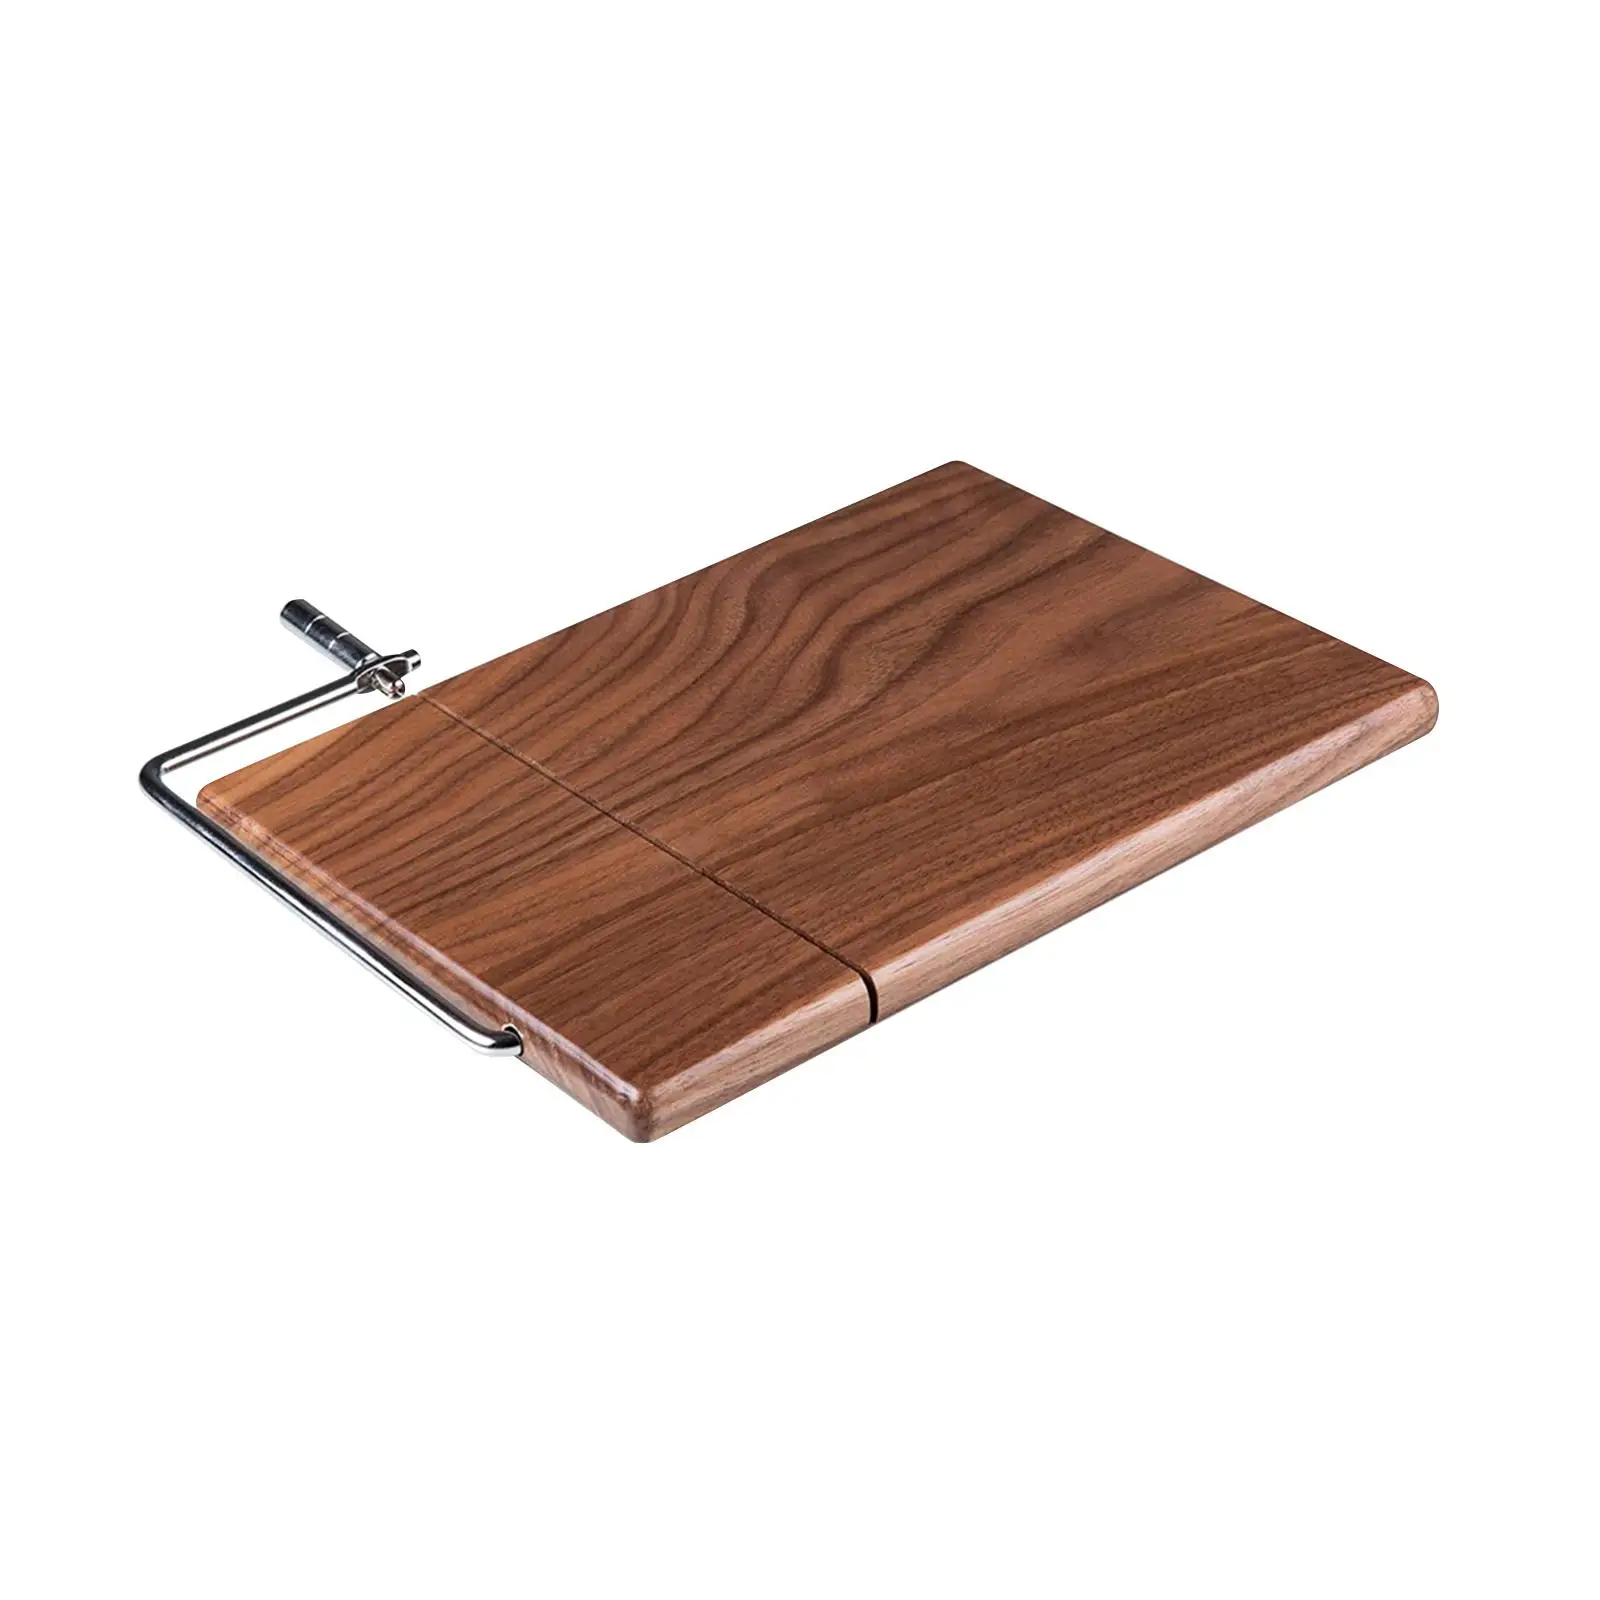 Wood Serving Board with Cheese Slicer with Stainless Steel Wire Cooking Butter Dessert Food Slicer for Fruits Butter Tofu Cheese